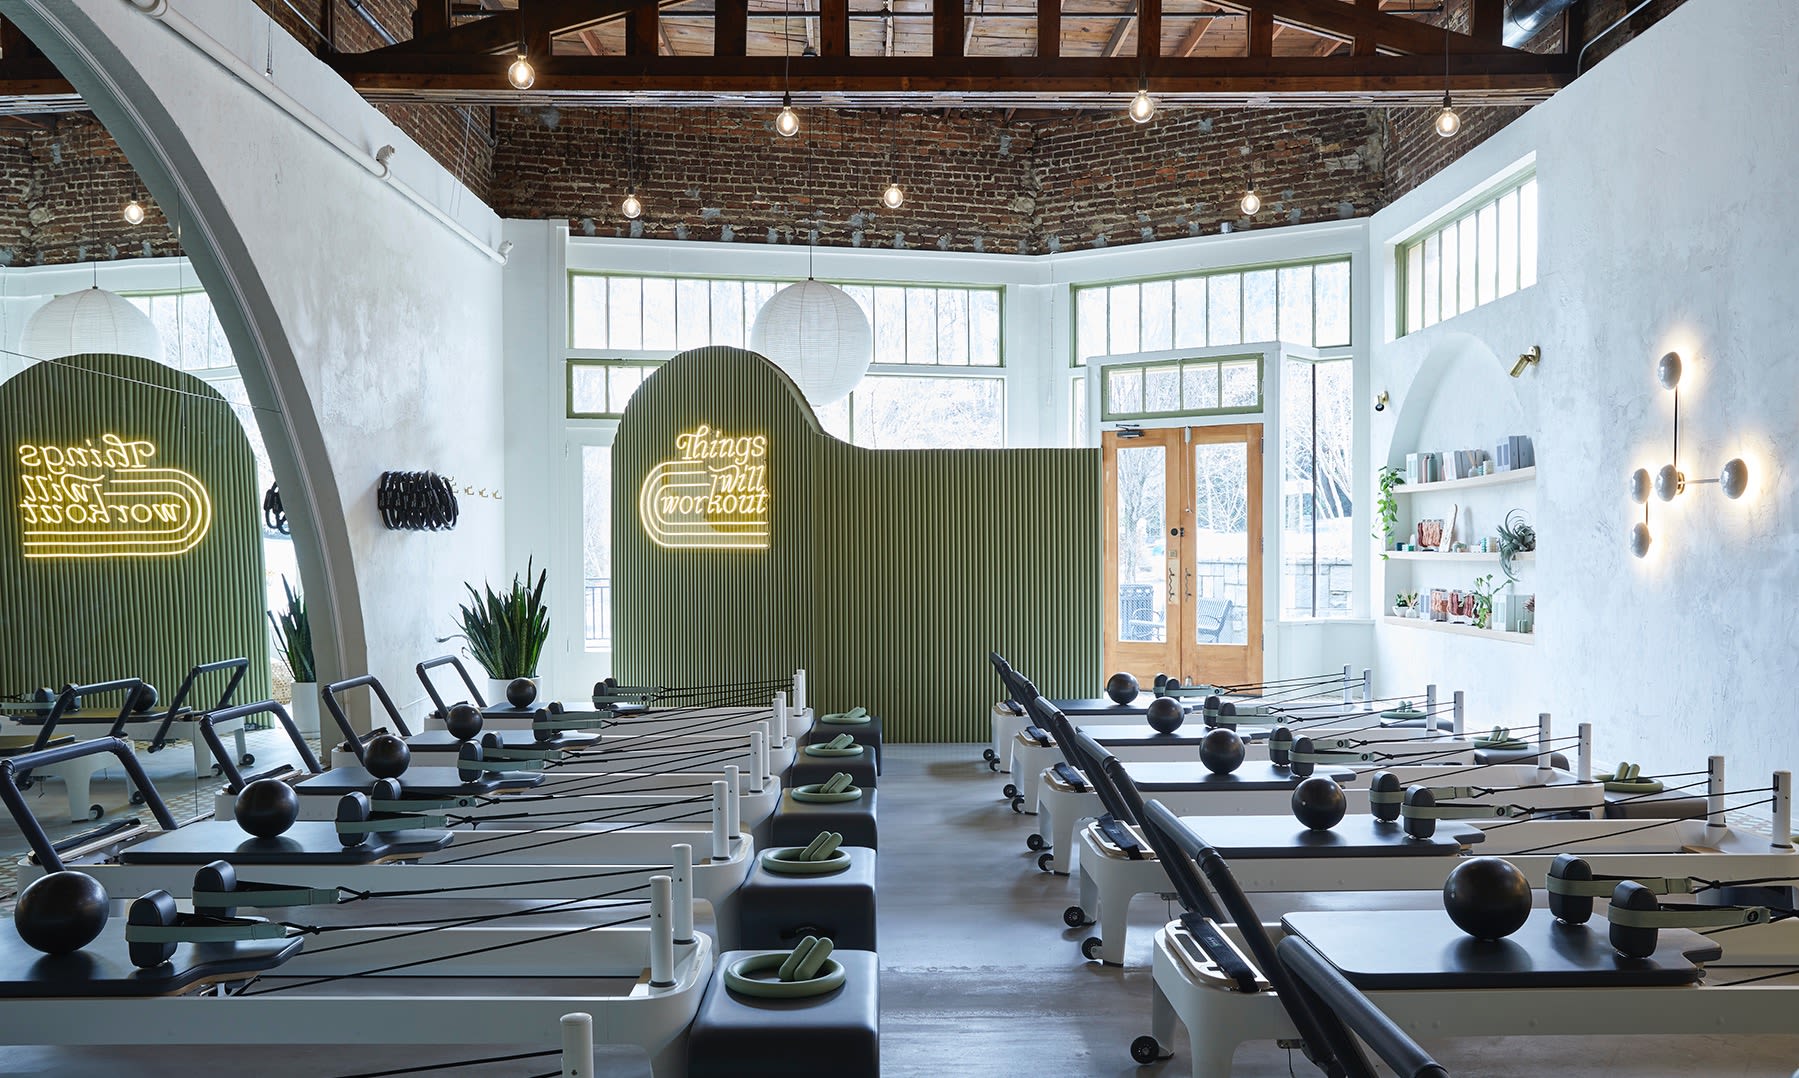 The Studio Pilates: Read Reviews and Book Classes on ClassPass